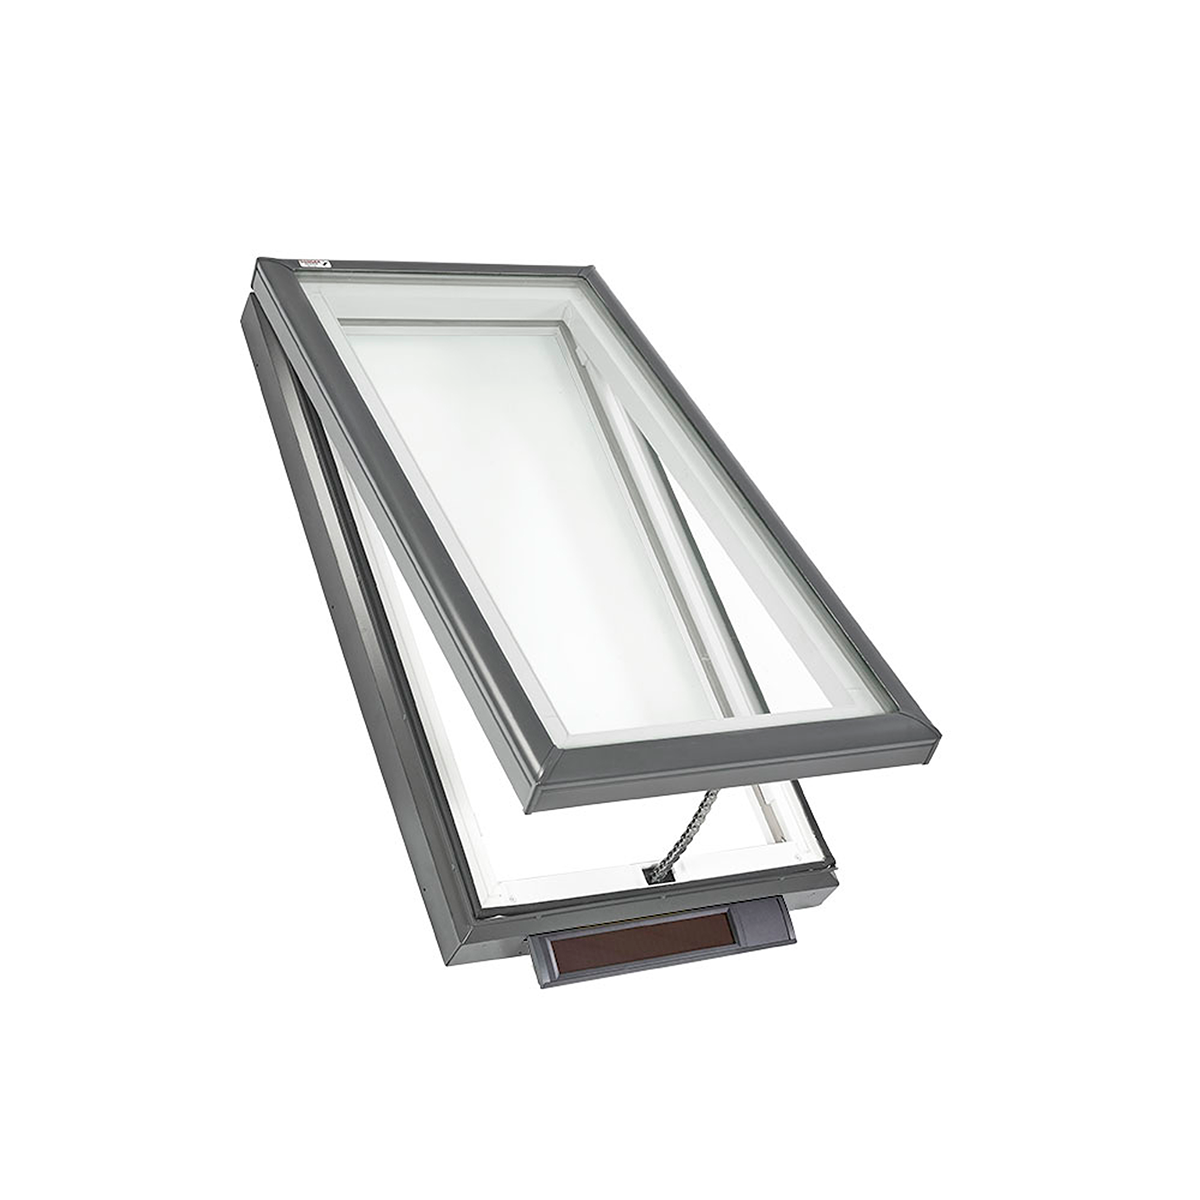 Solar Powered Curb-Mount Skylight with Laminated Low-E3 Glass - 46-1/2 in. x 46-1/2 in. - VCS 4646